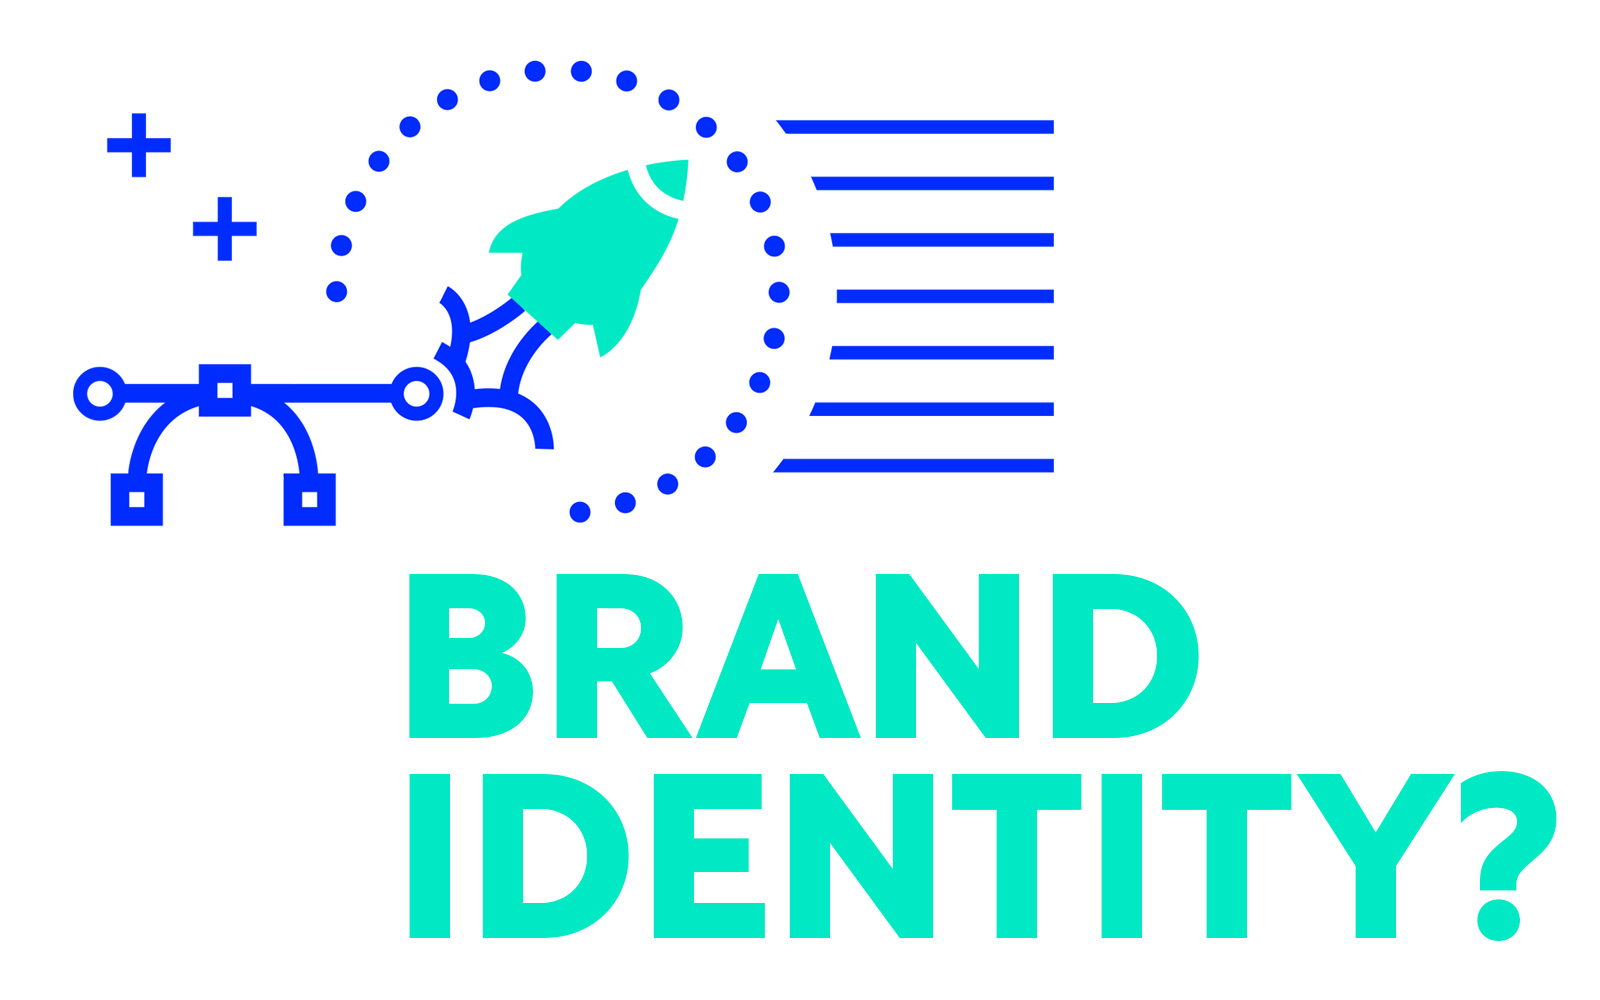 Who needs brand identity by Oliver Milburn.